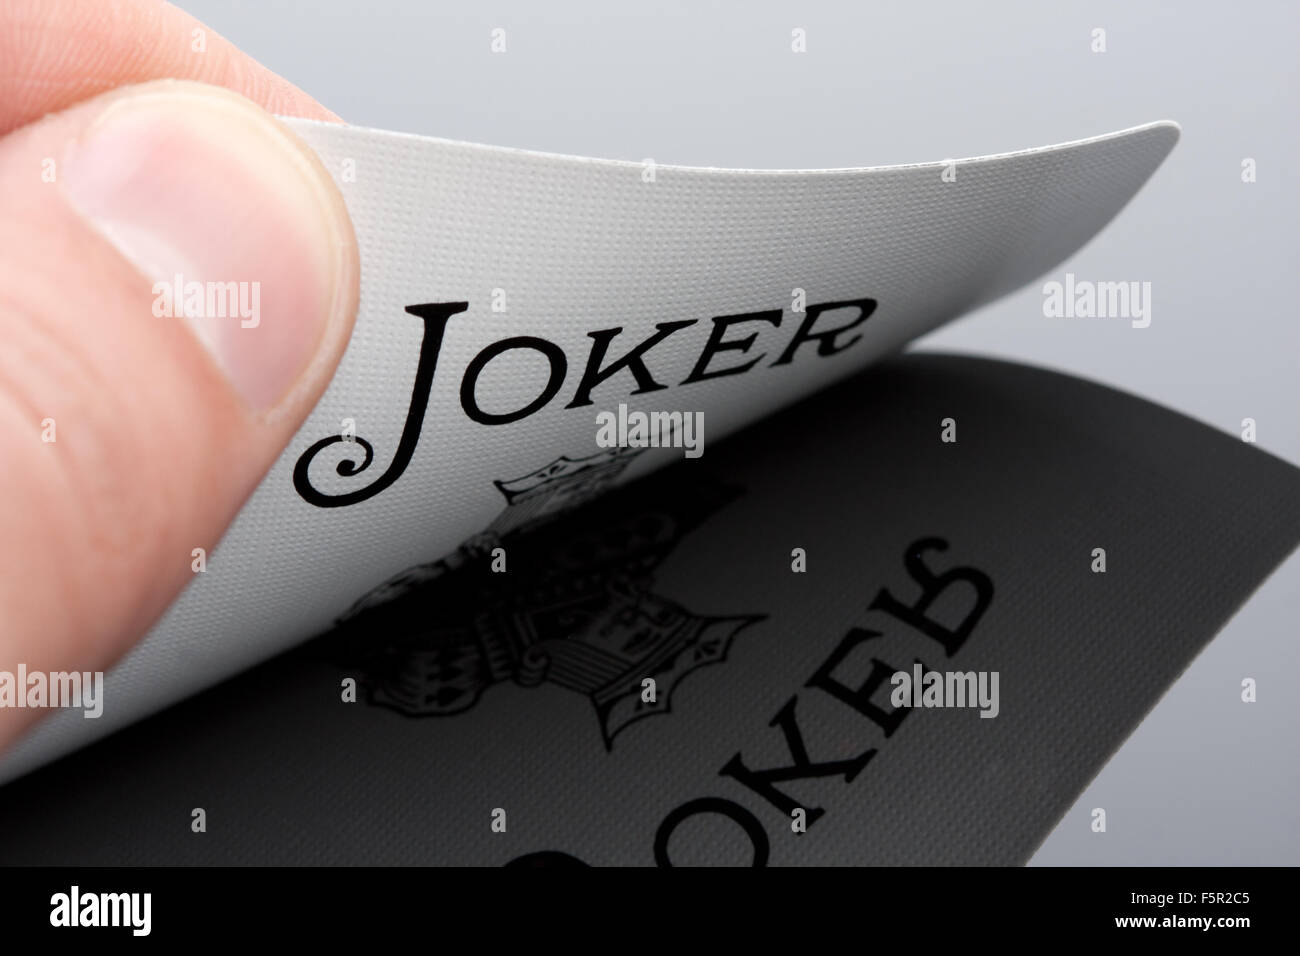 Close-up of Joker card in palm of hand Stock Photo